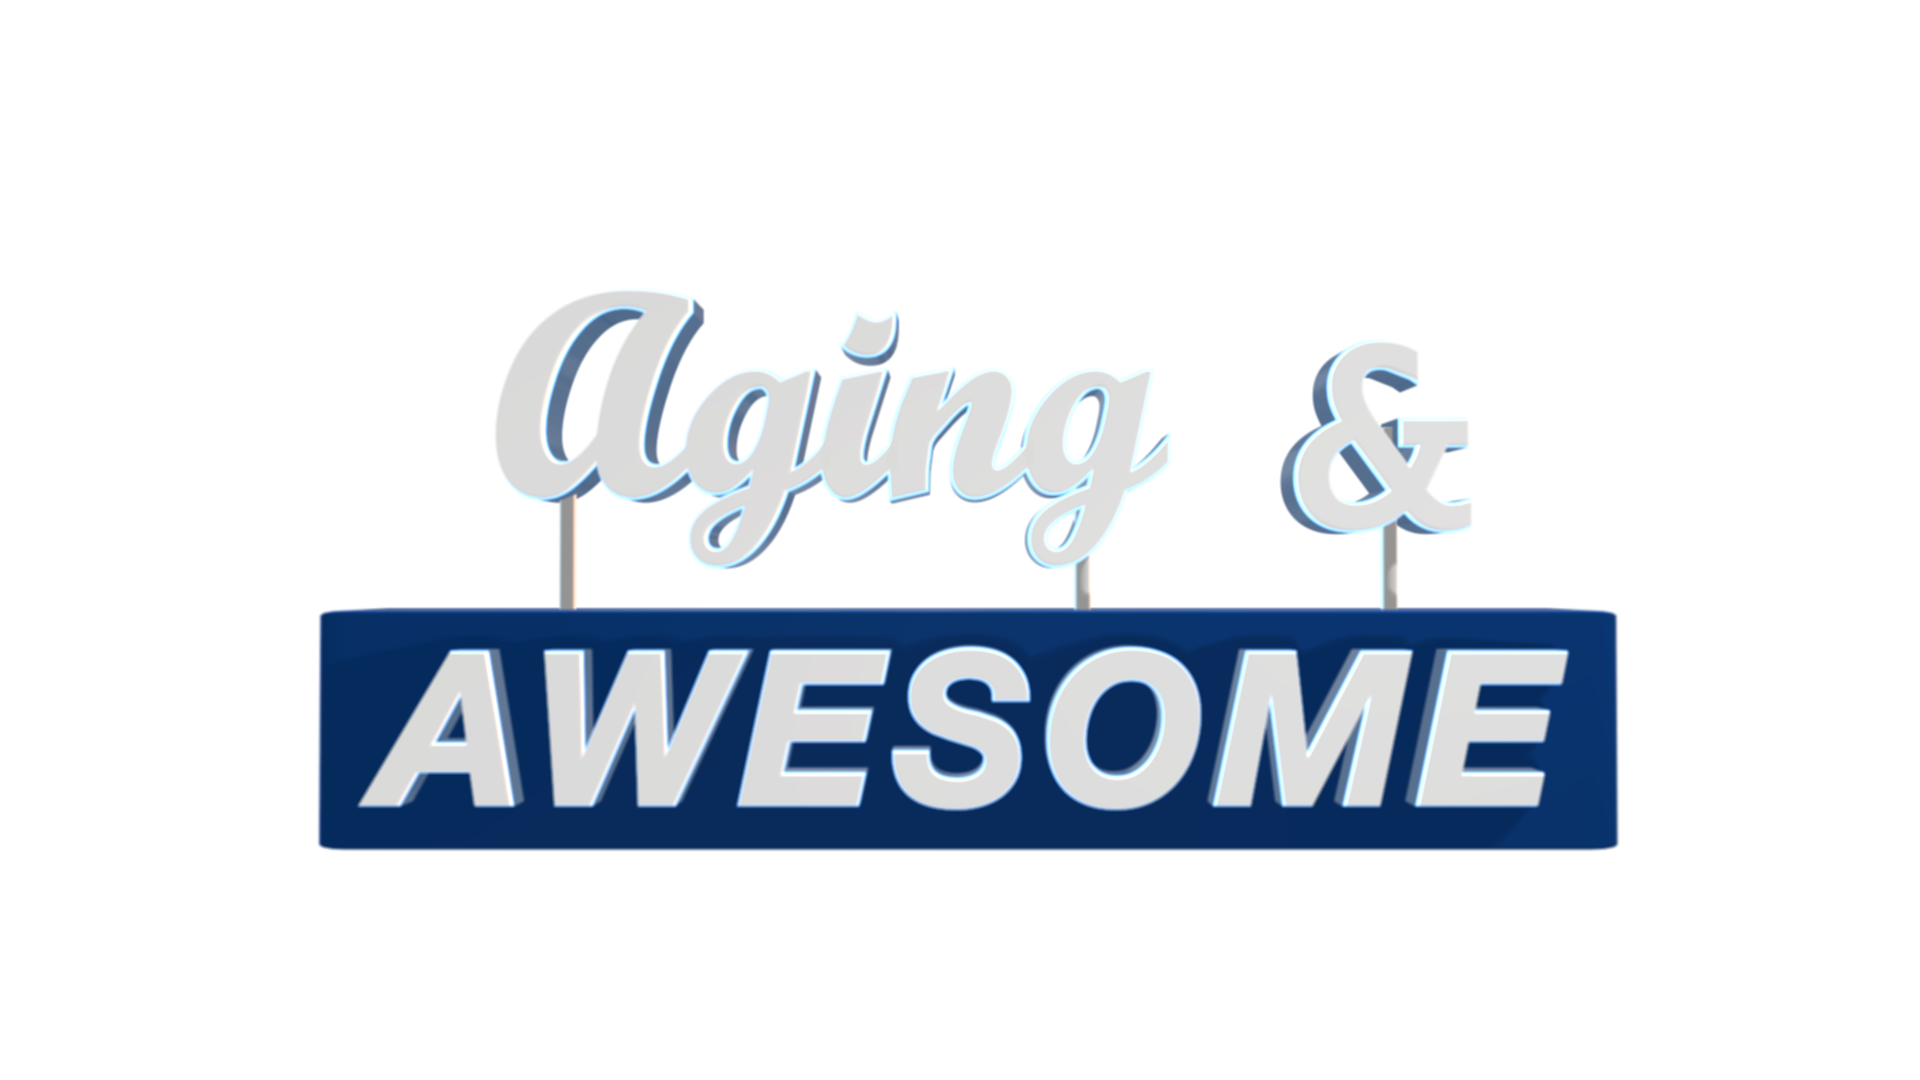 2. Aging & Awesome (Media)